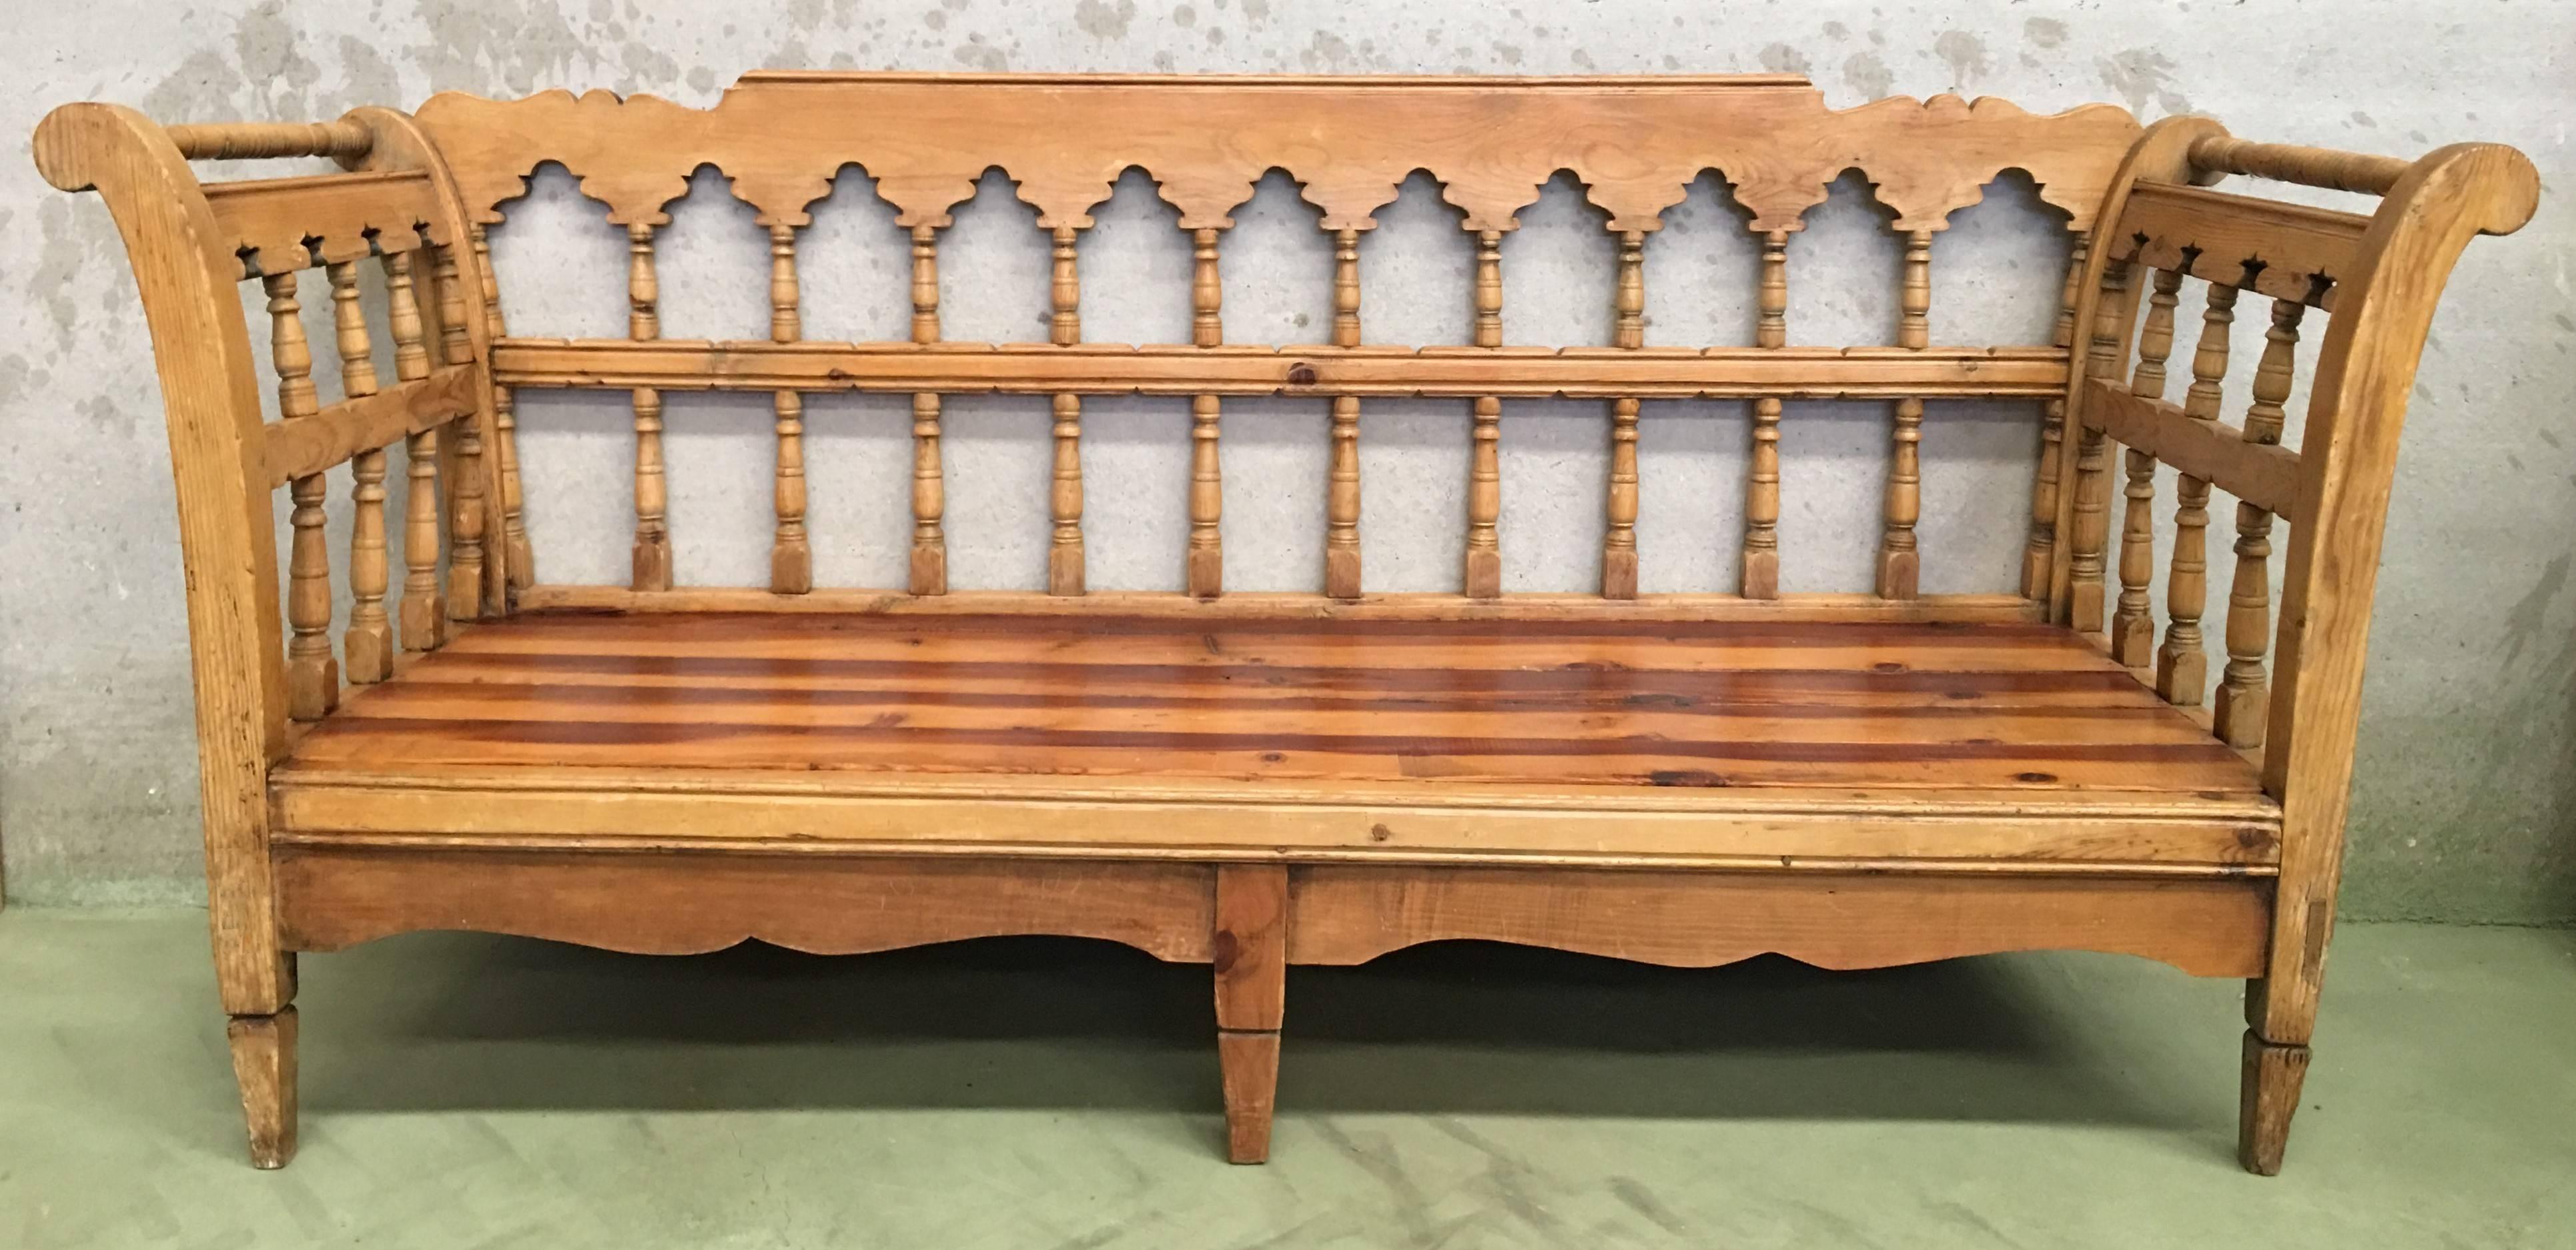 Spanish 19th Century Large Pine Country Bench or Daybed